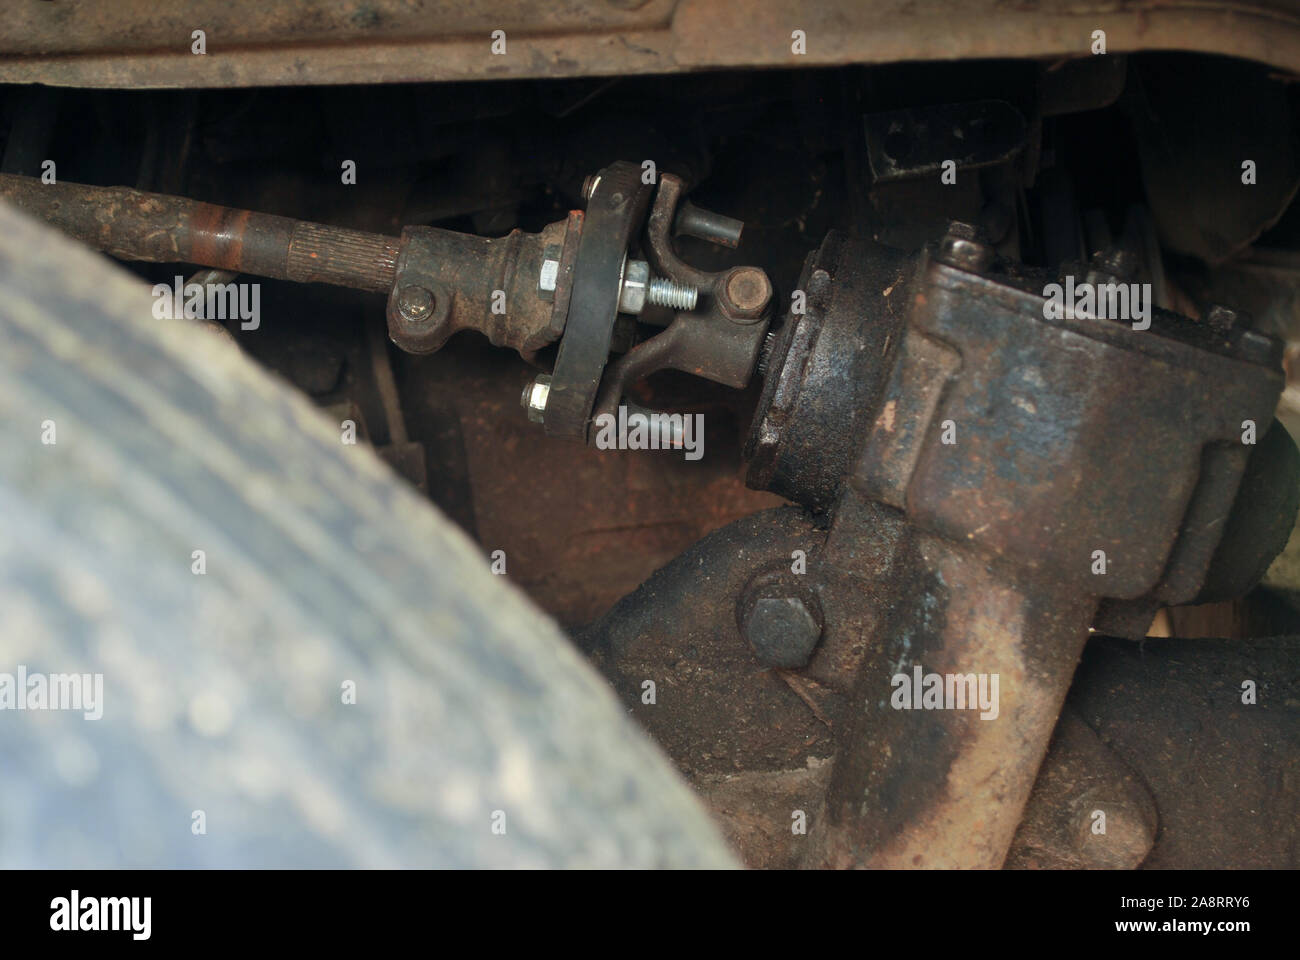 Spare parts for the old car interior. Stock Photo